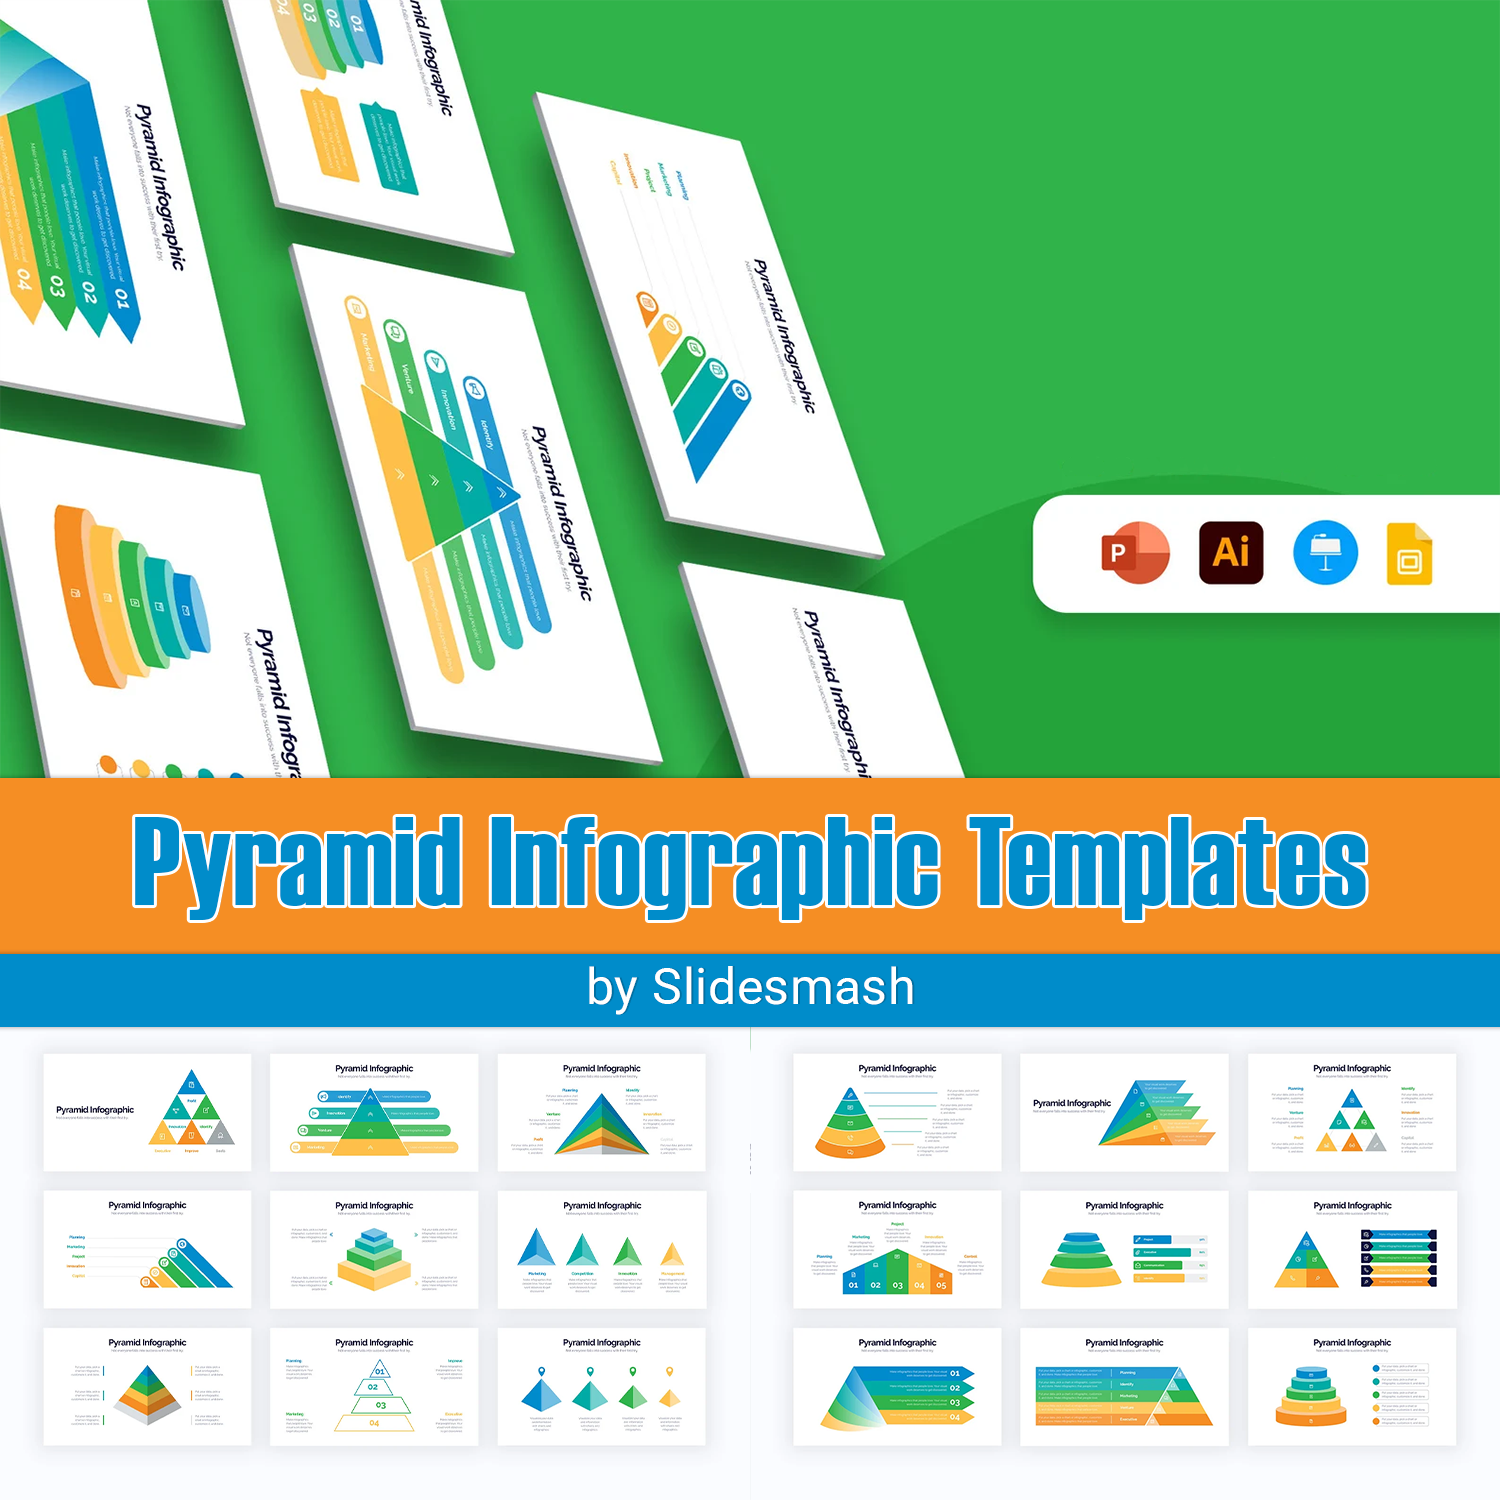 Pyramid Infographic Templates | Diagrams for PowerPoint, Illustrator, Keynote, Google Slides.